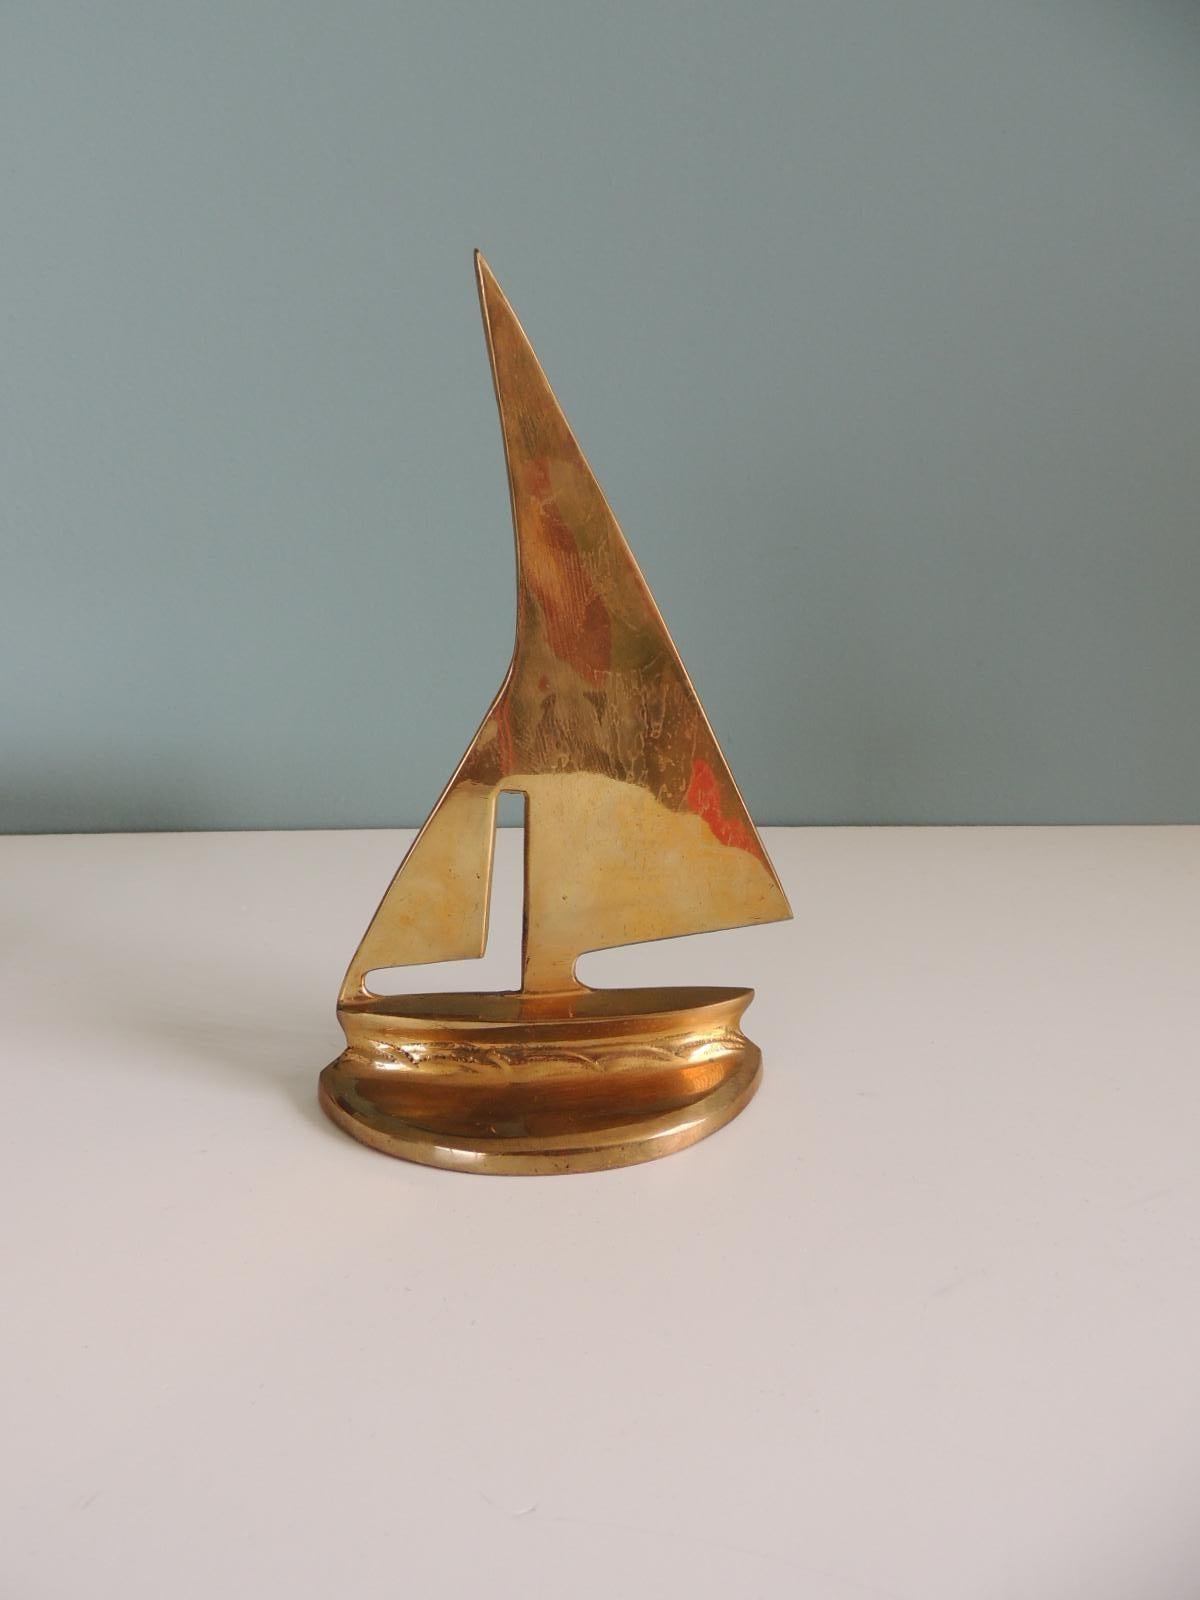 MCM small brass sailing boat bookend or paperweight.
Polished brass.
Size: 7.75